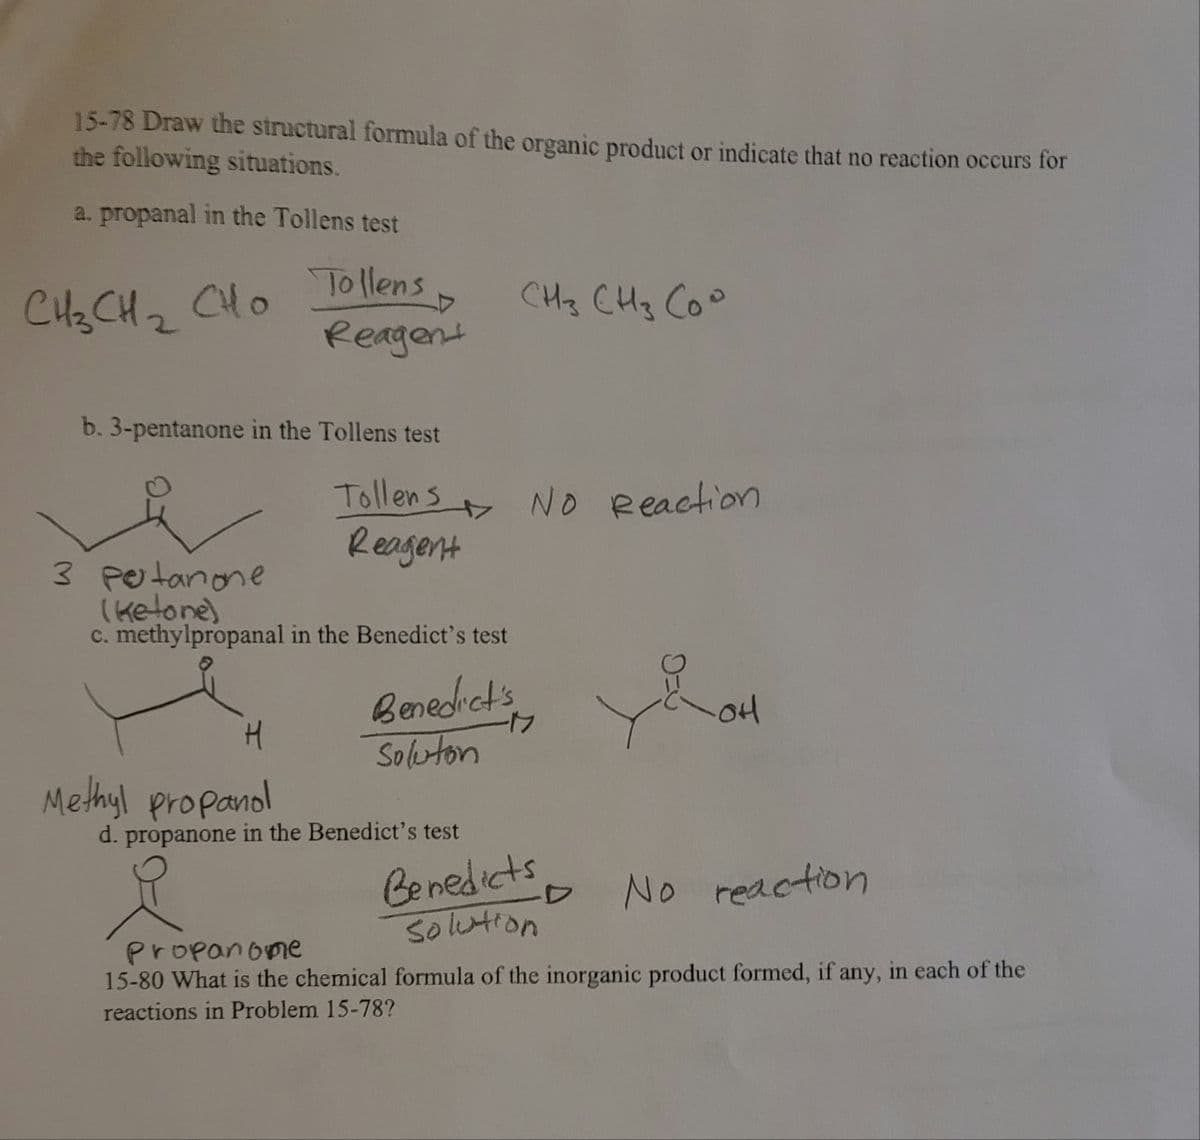 15-78 Draw the structural formula of the organic product or indicate that no reaction occurs for
the following situations.
a. propanal in the Tollens test
Tollens
Reagent
CH2 CH2
CHo
CH3 CHg Coo
b. 3-pentanone in the Tollens test
Tollens NO eeaction
Reagent
3 Petanone
(ketone)
C. methylpropanal in the Benedict's test
Benedets
Soluton
Methyl propanol
d. propanone in the Benedict's test
Benedicts
Solution
No reaction
Propanome
15-80 What is the chemical formula of the inorganic product formed, if any, in each of the
reactions in Problem 15-78?
